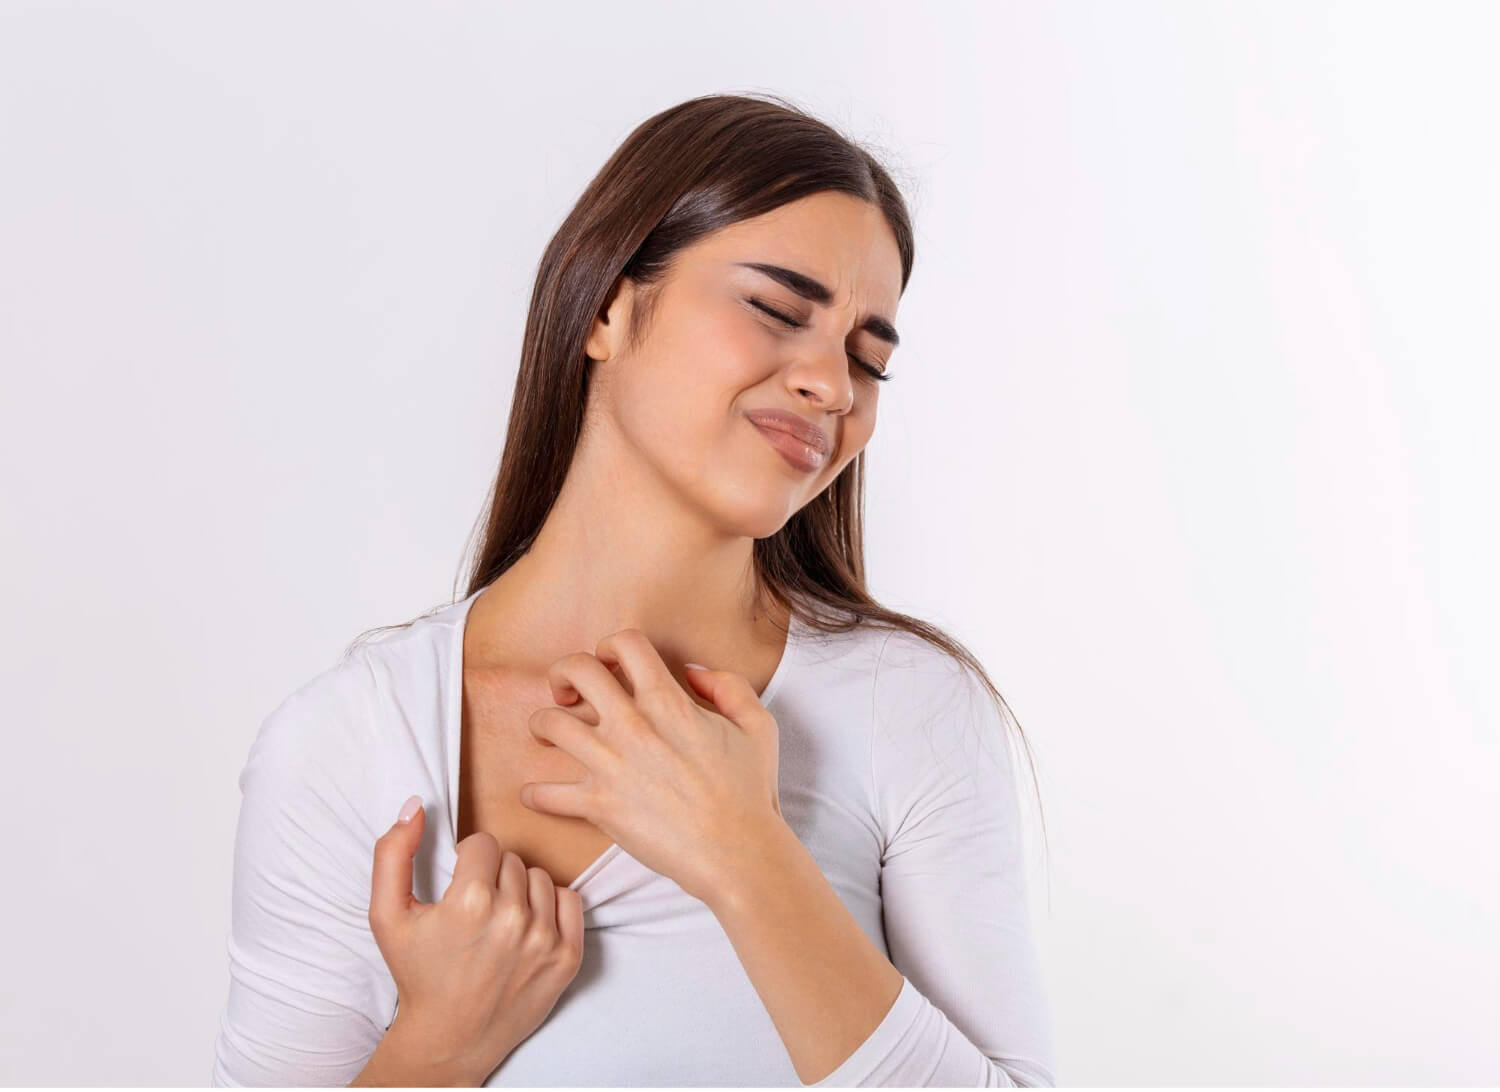 young-woman-scratching-her-neck-due-itching-gray-background-female-has-itching-neck-concept-allergy-symptoms-healthcare